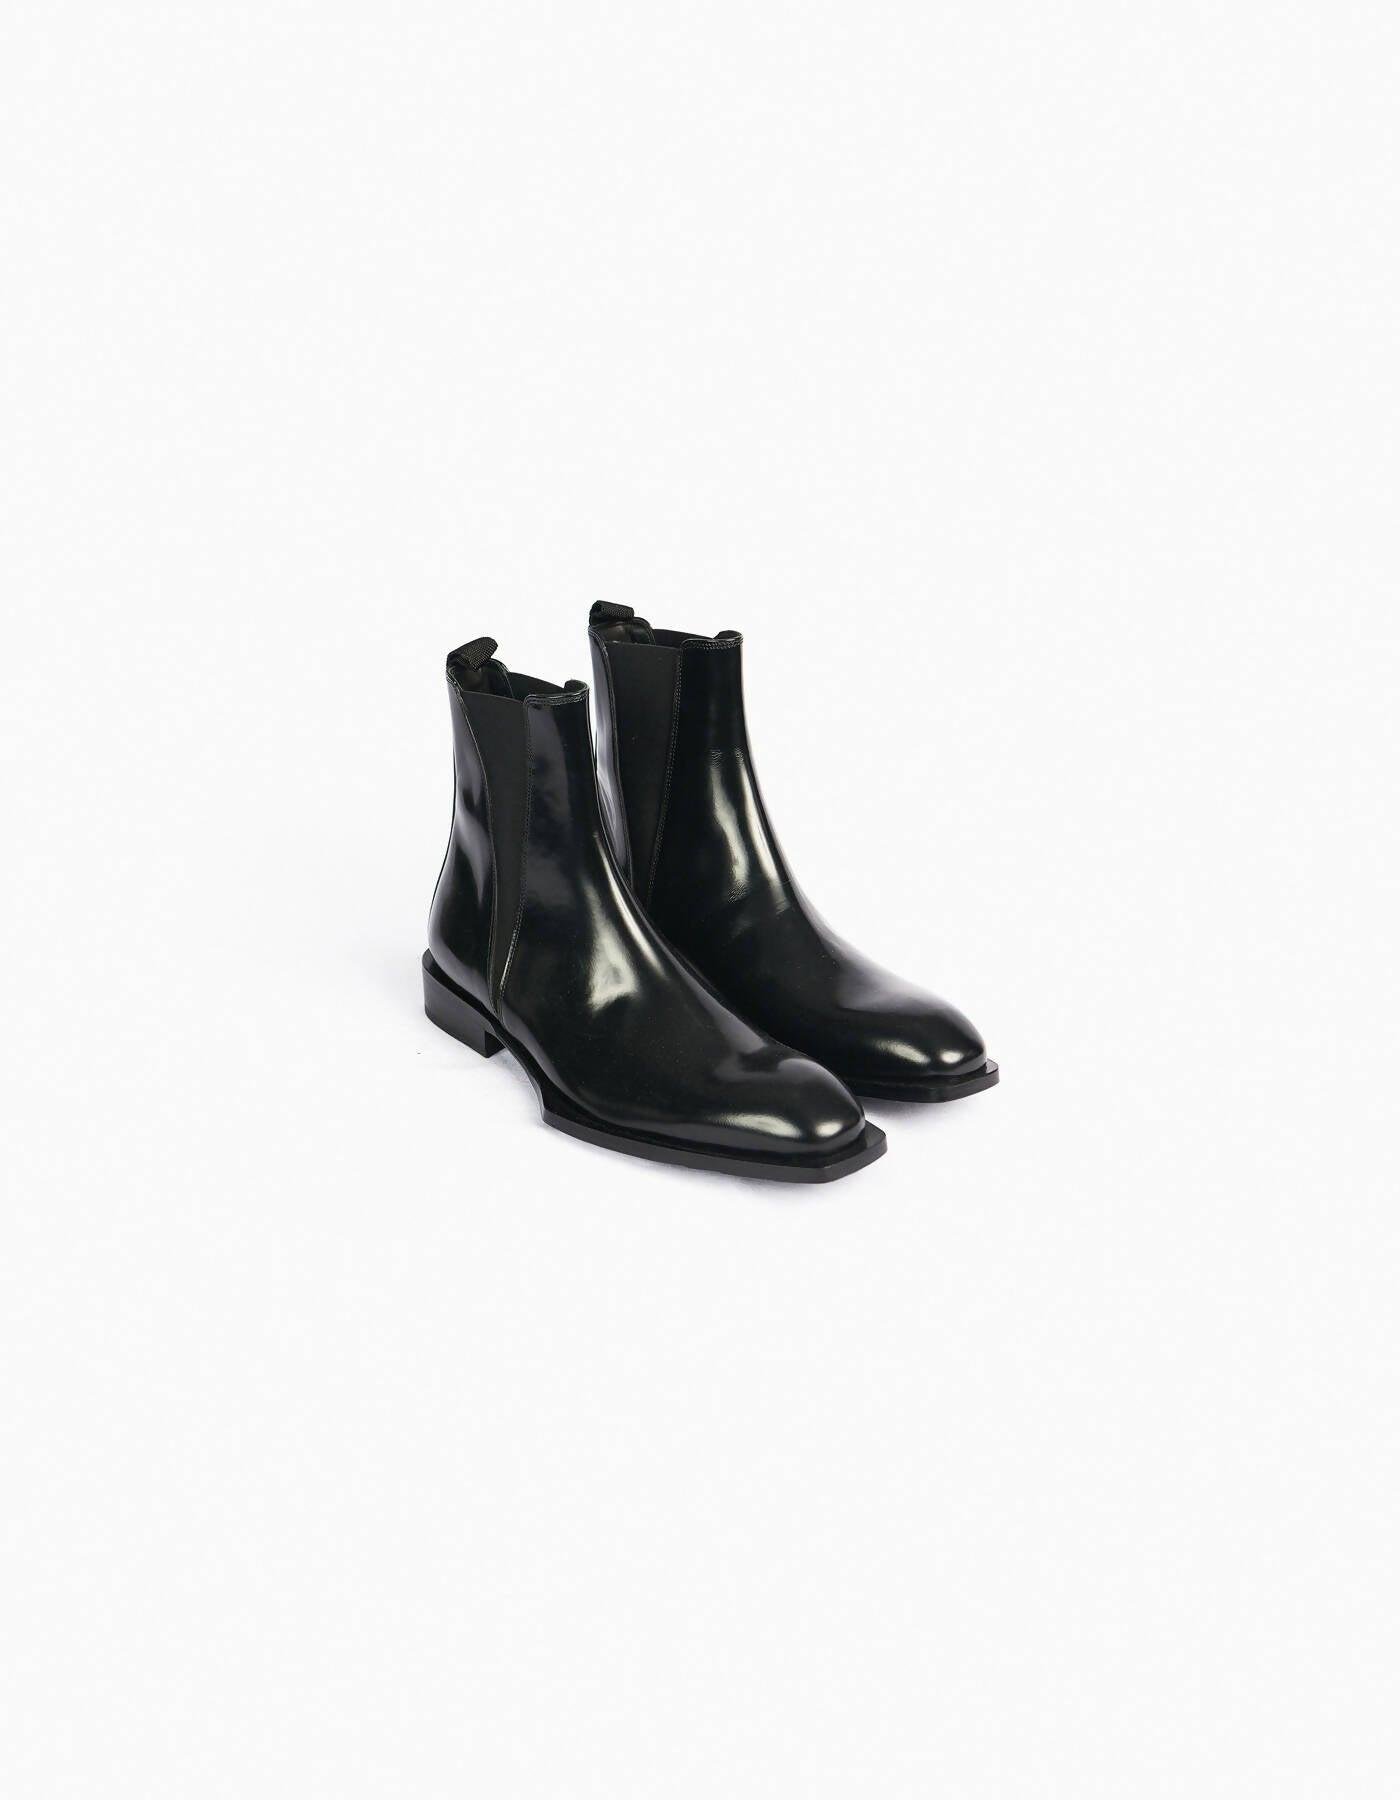 Chelsea Boots by MERCADER